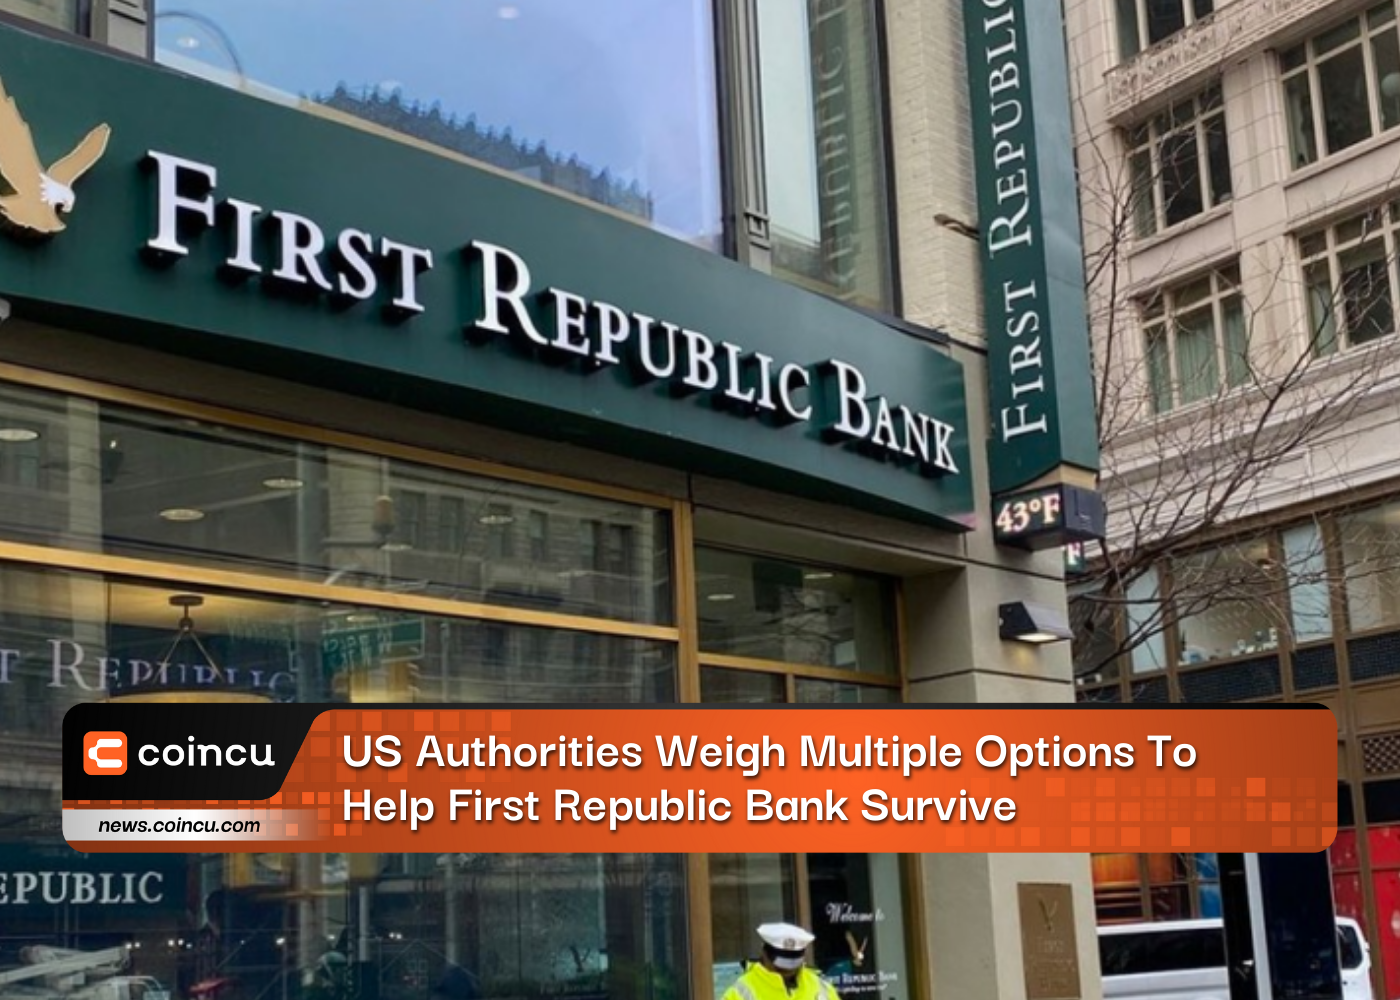 US Authorities Weigh Multiple Options To Help First Republic Bank Survive